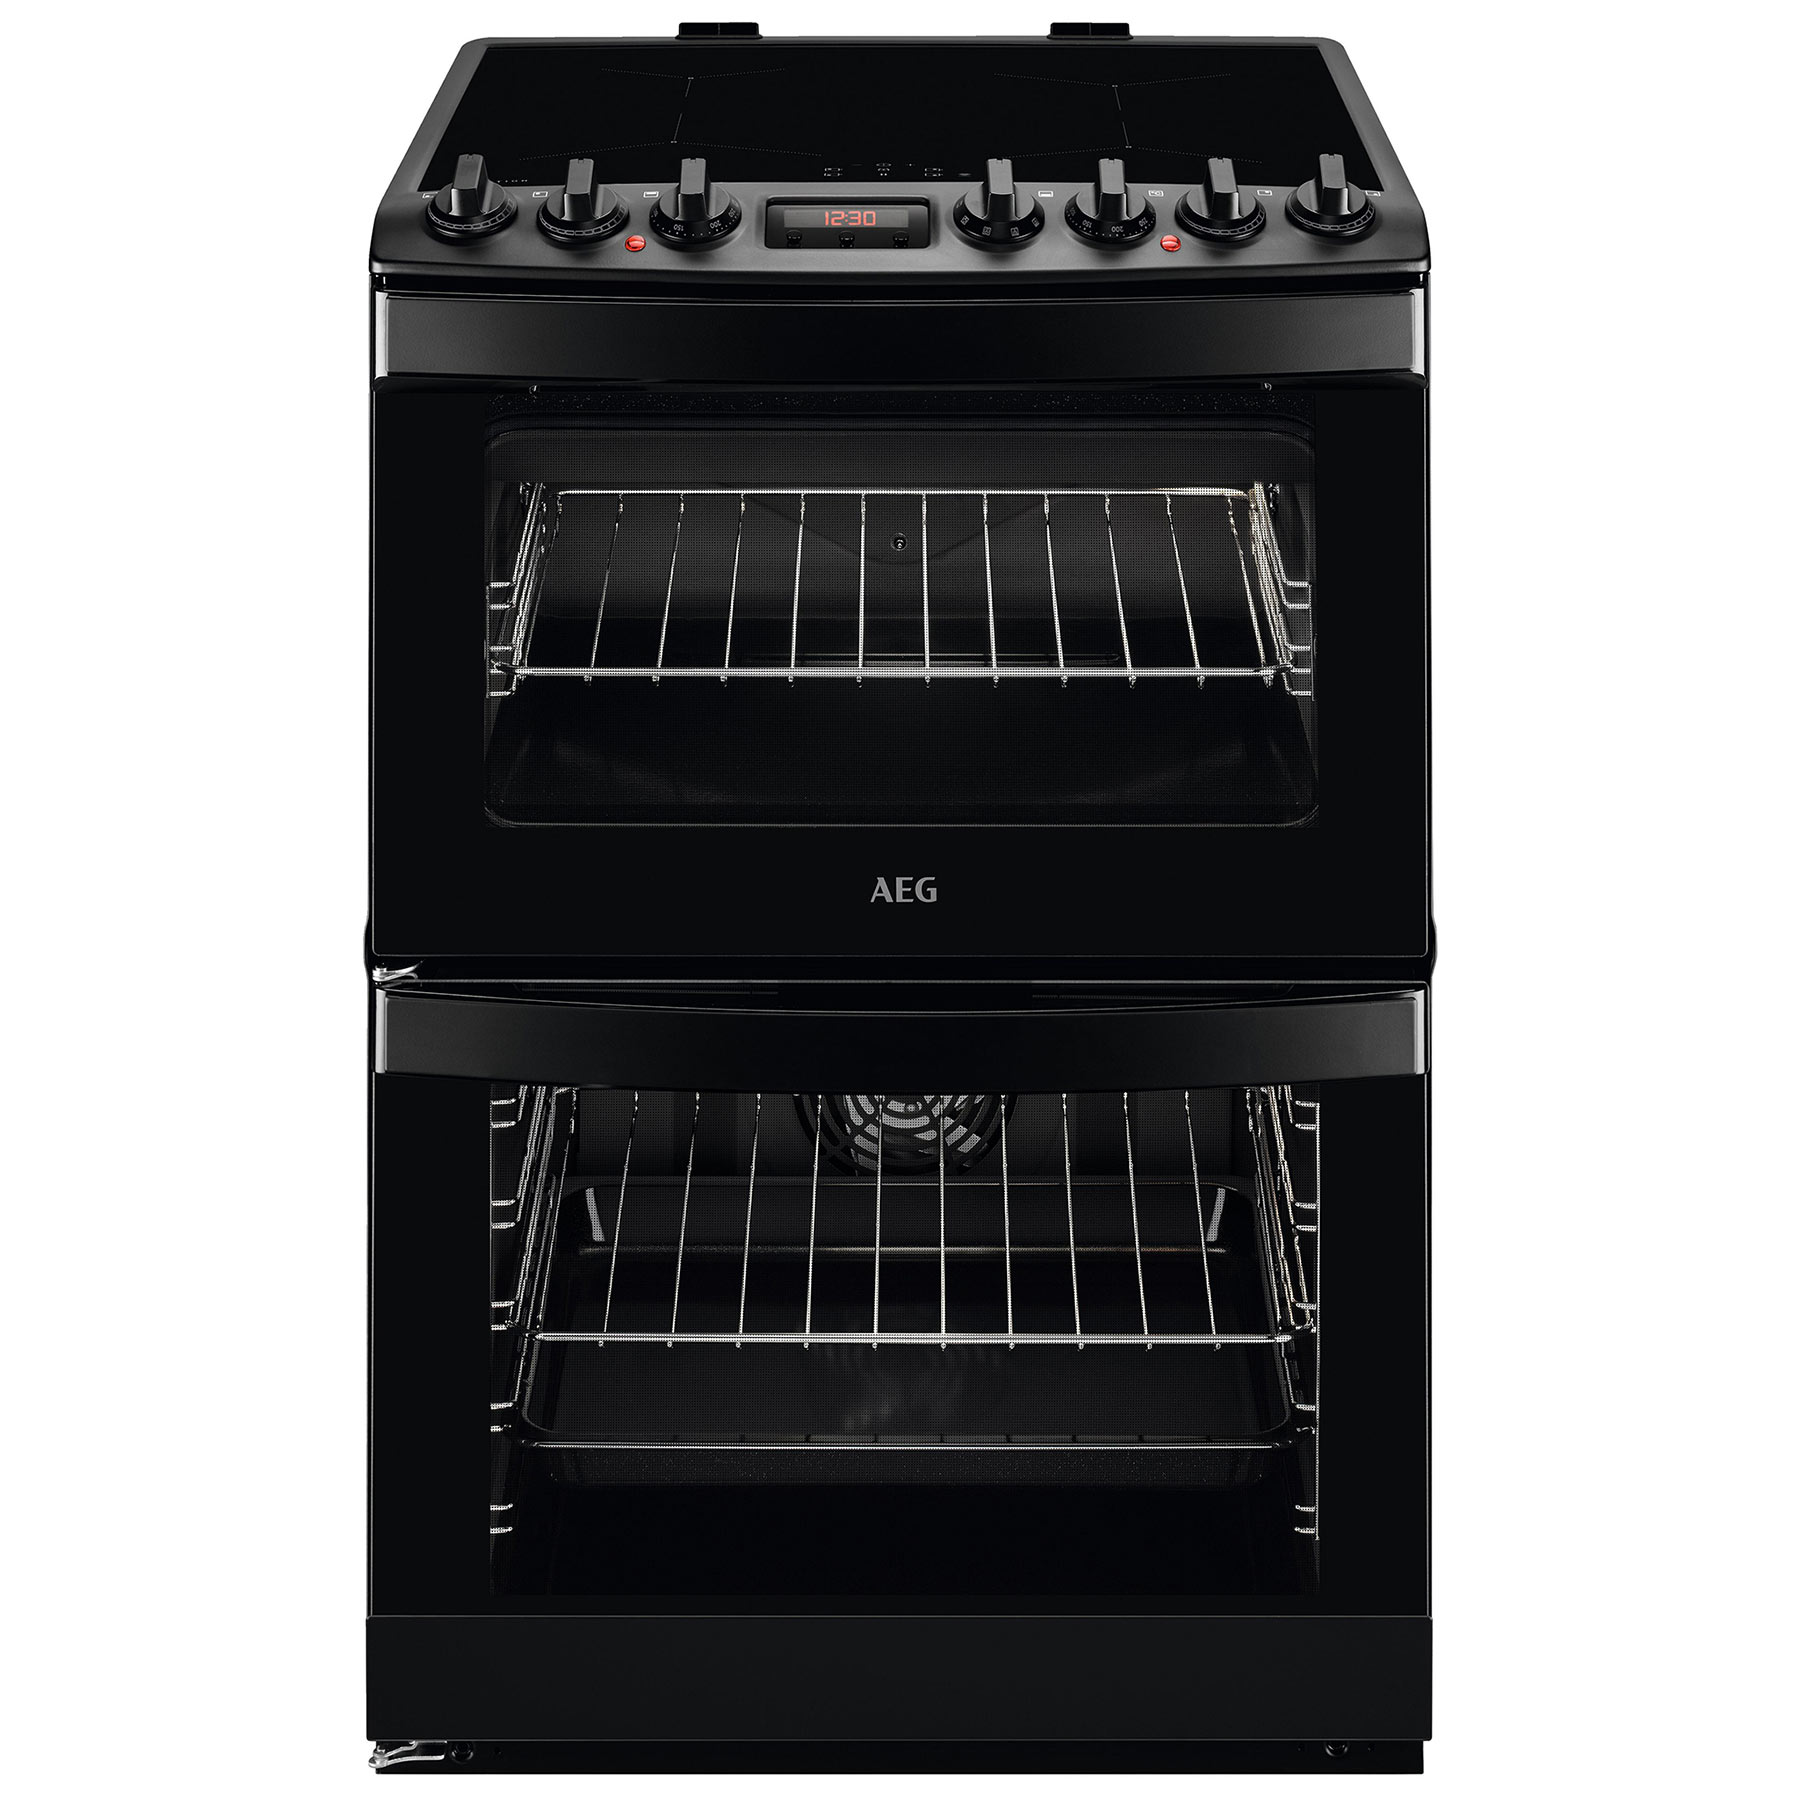 Image of AEG CIB6742MCB 60cm Double Oven Electric Cooker in Black Induction Hob